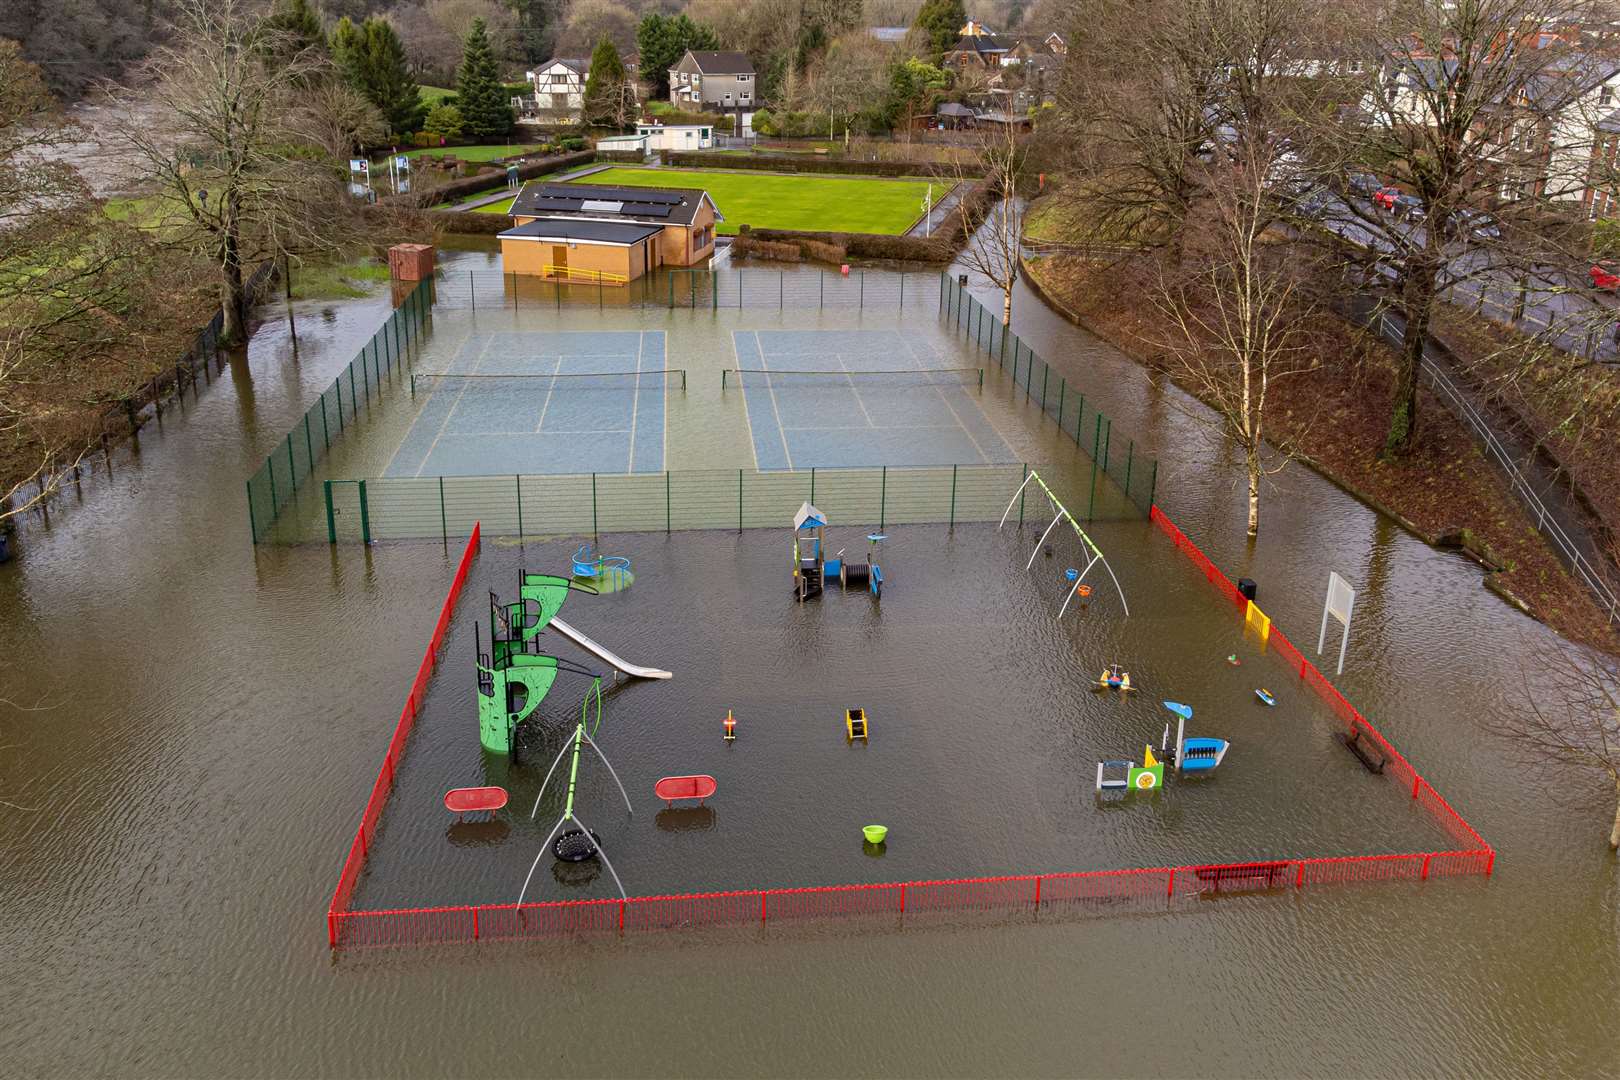 Flooding next to the River Taff has submerged the play park in Taff’s Well, Wales (Ben Birchall/PA)